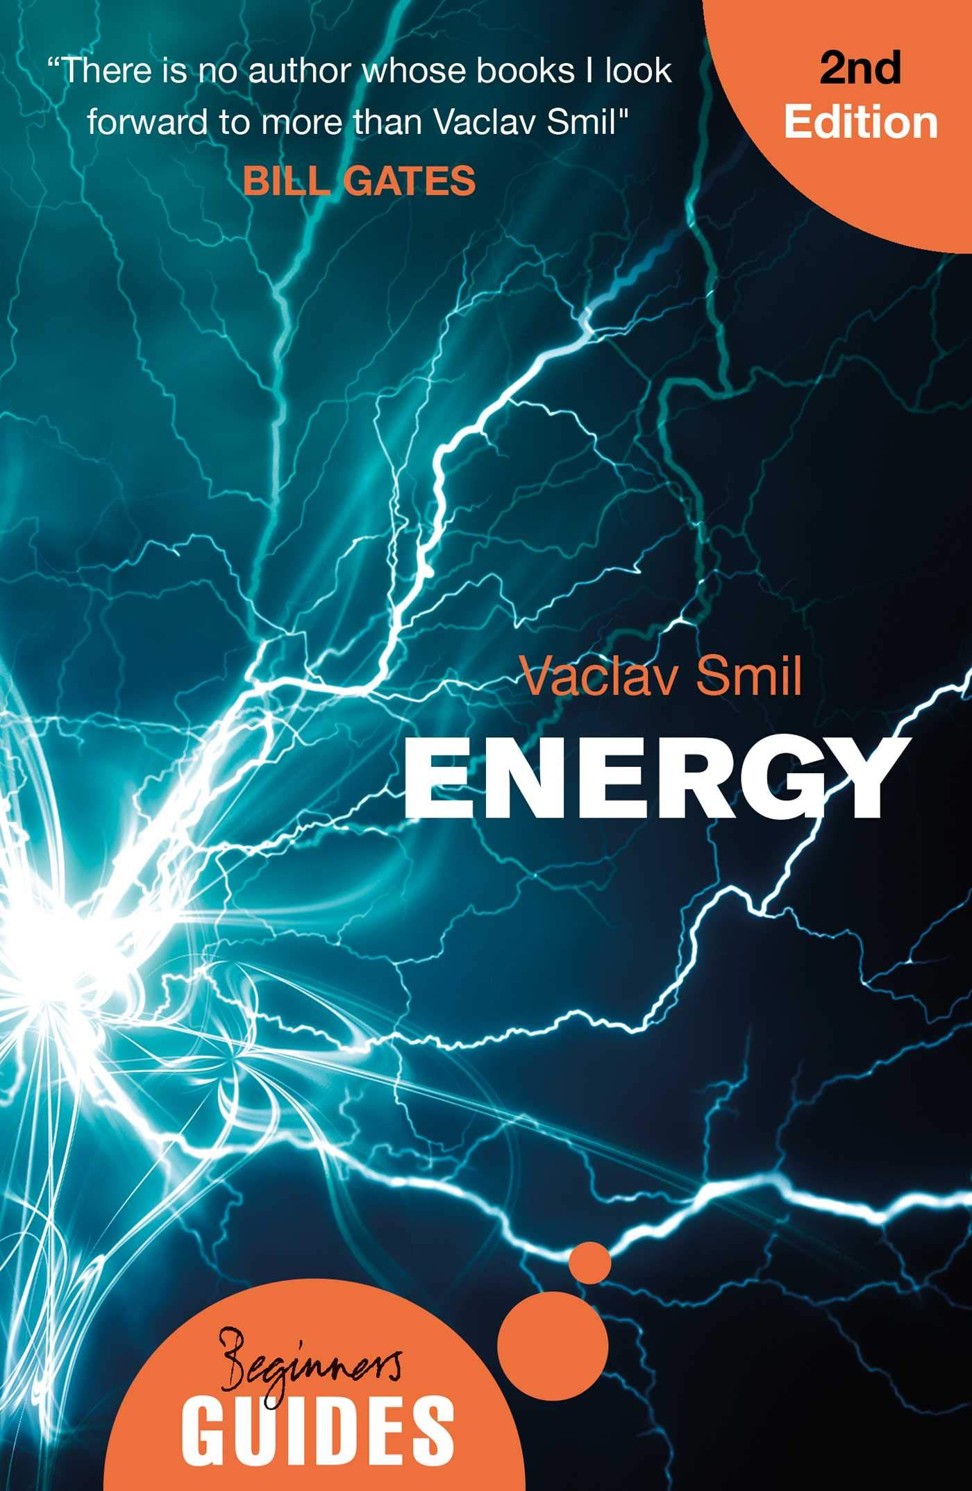 Energy: A Beginner’s Guide, by Vaclav Smil.